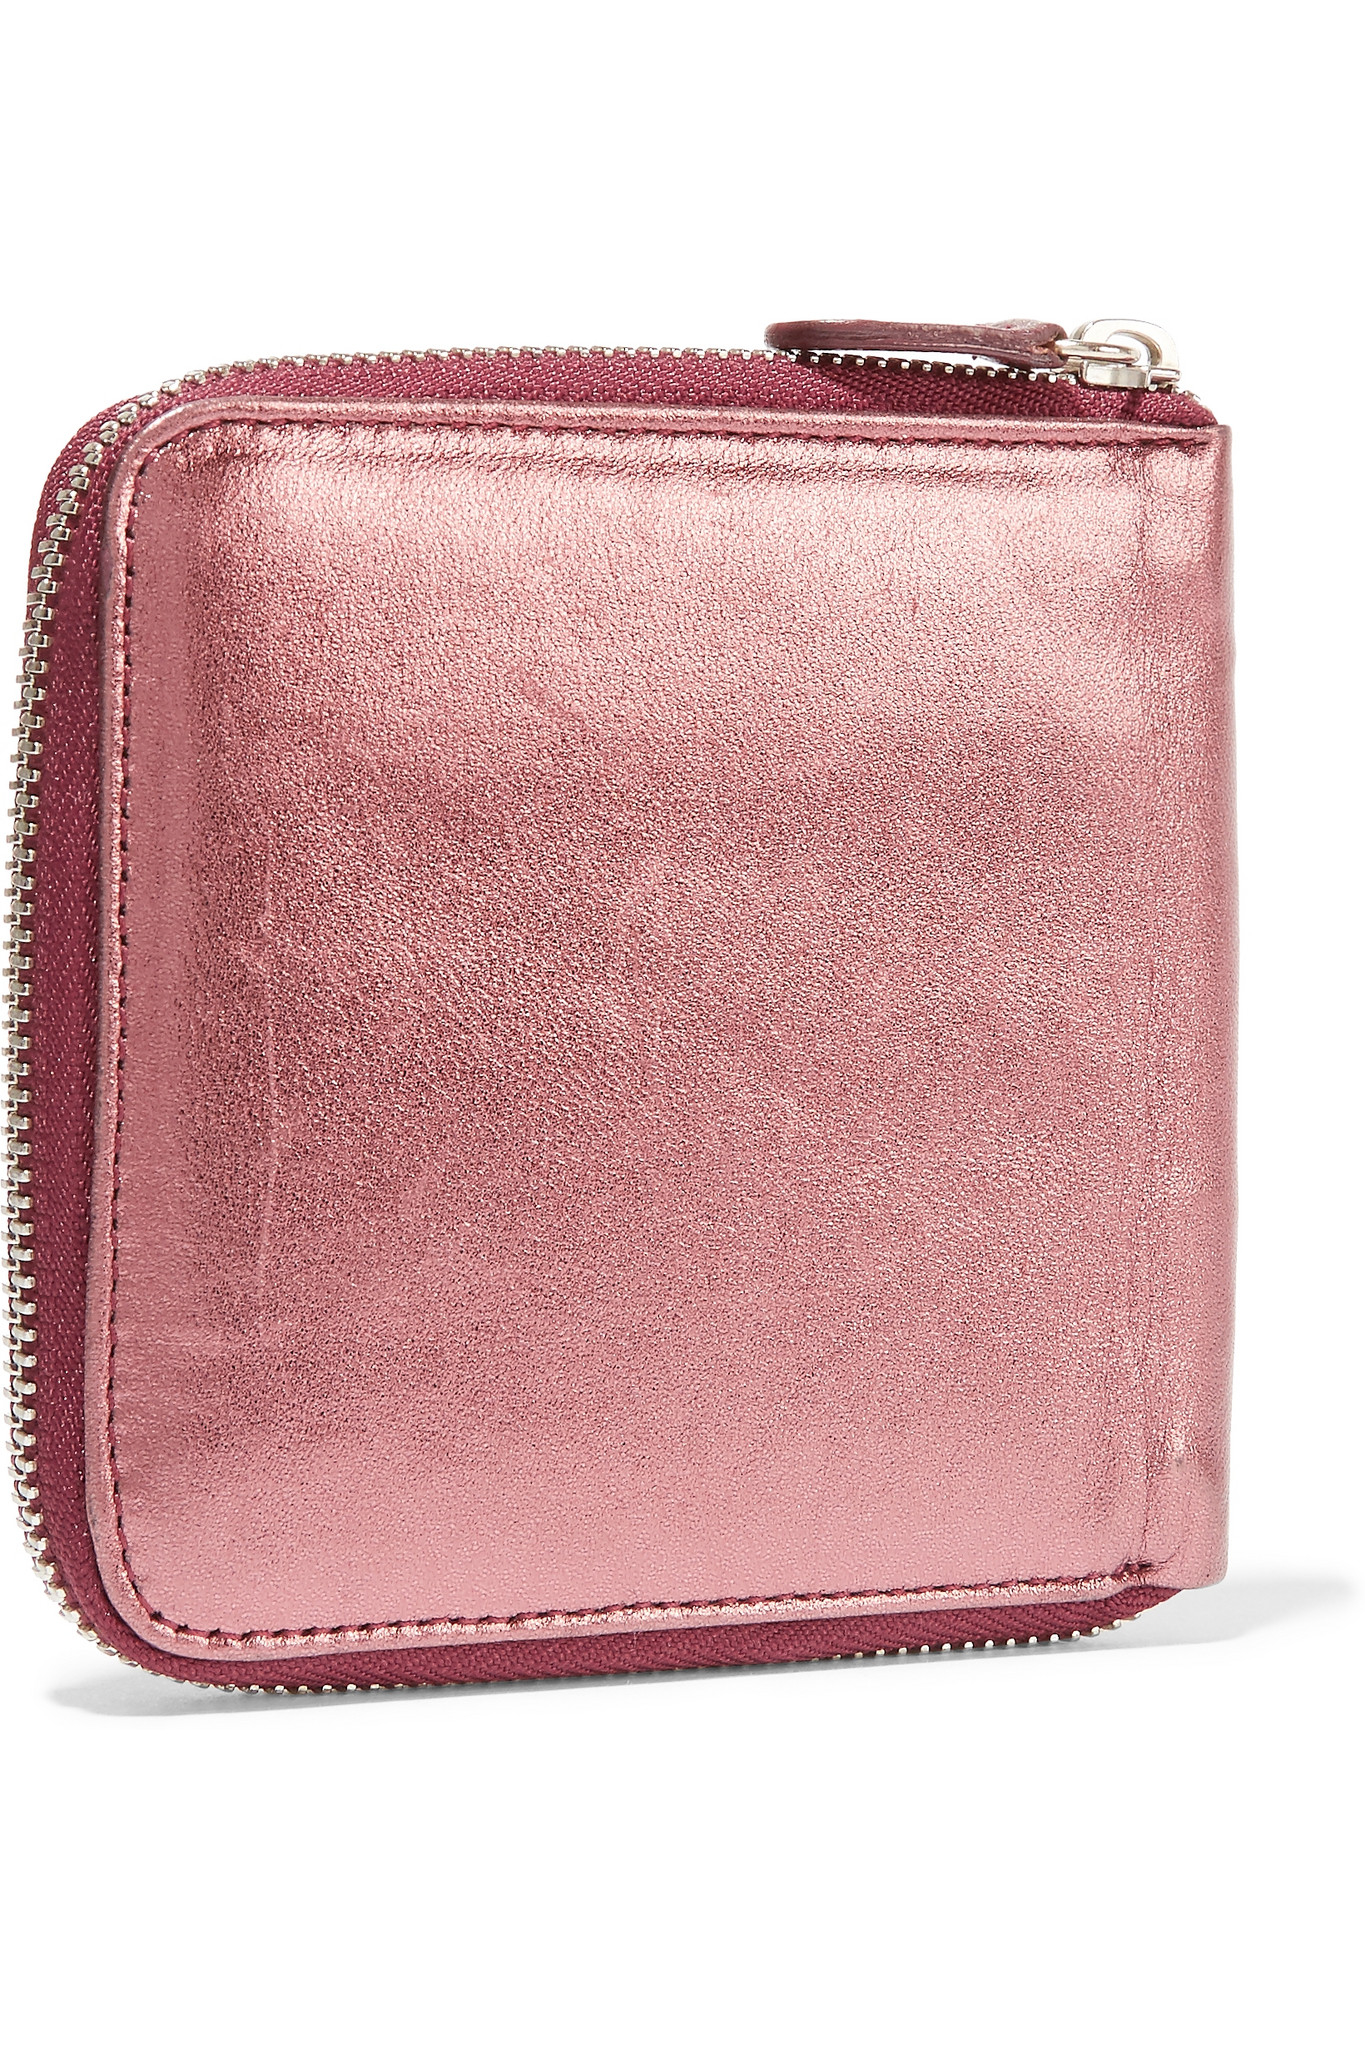 Marni Metallic Leather Wallet in Pink - Lyst